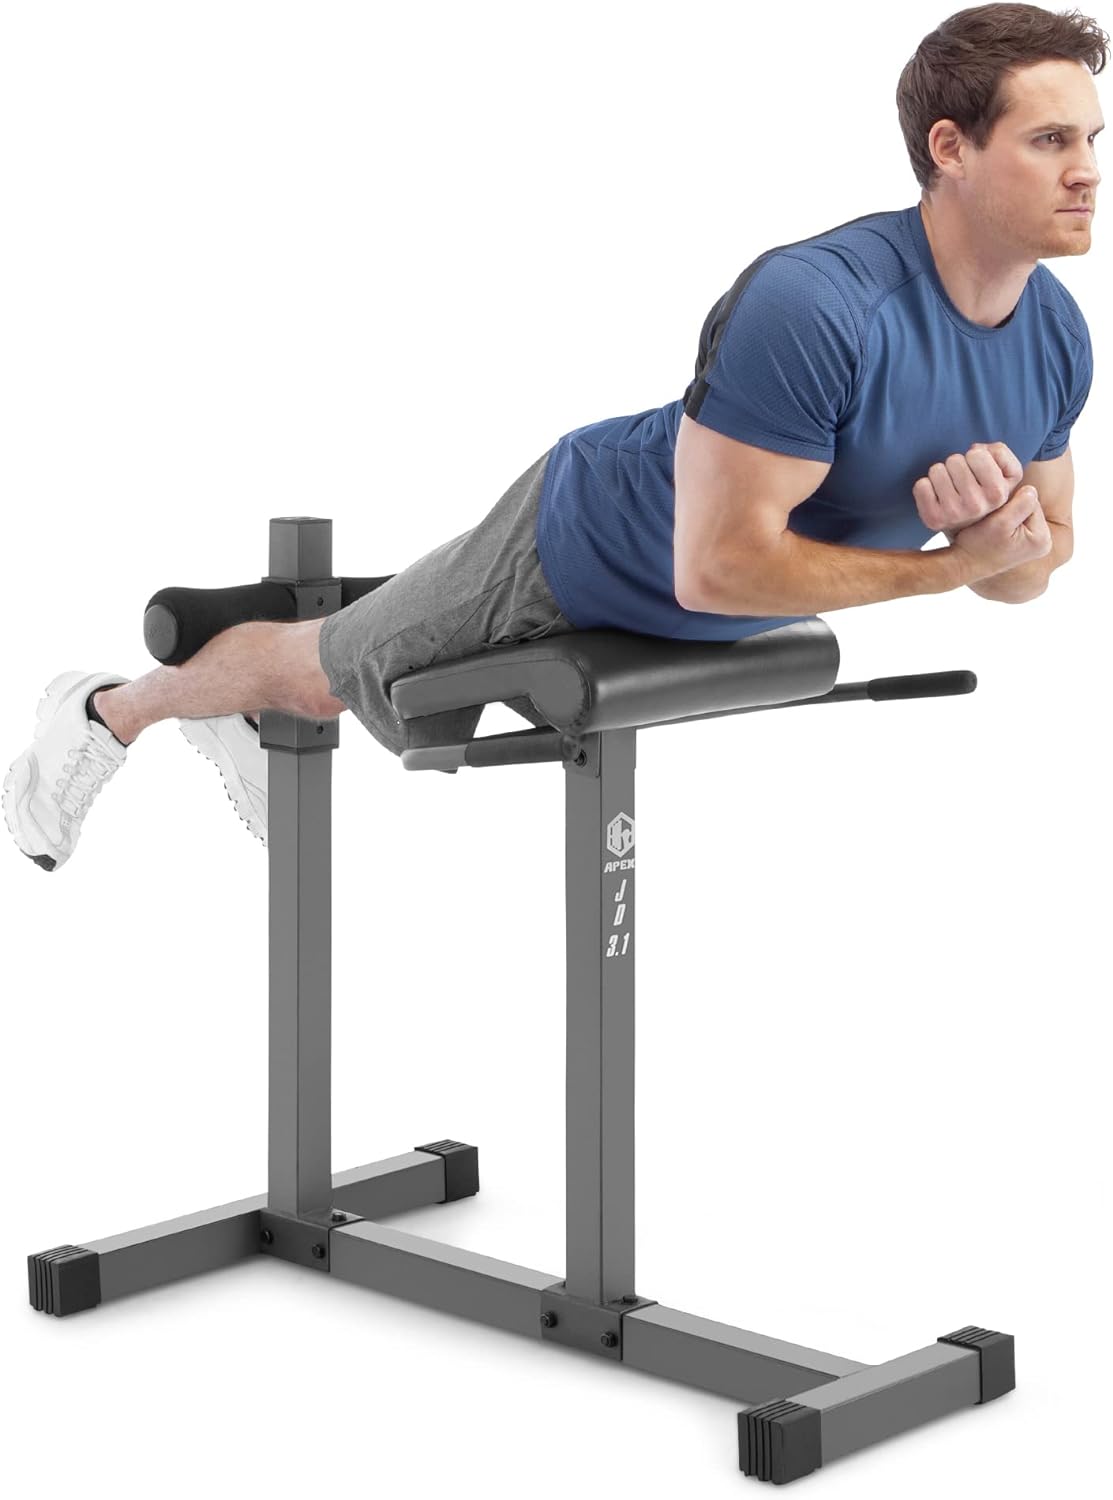  Sunny Health & Fitness Hyperextension Roman Chair Ab Workouts Sit Up Gym Bench for Home 